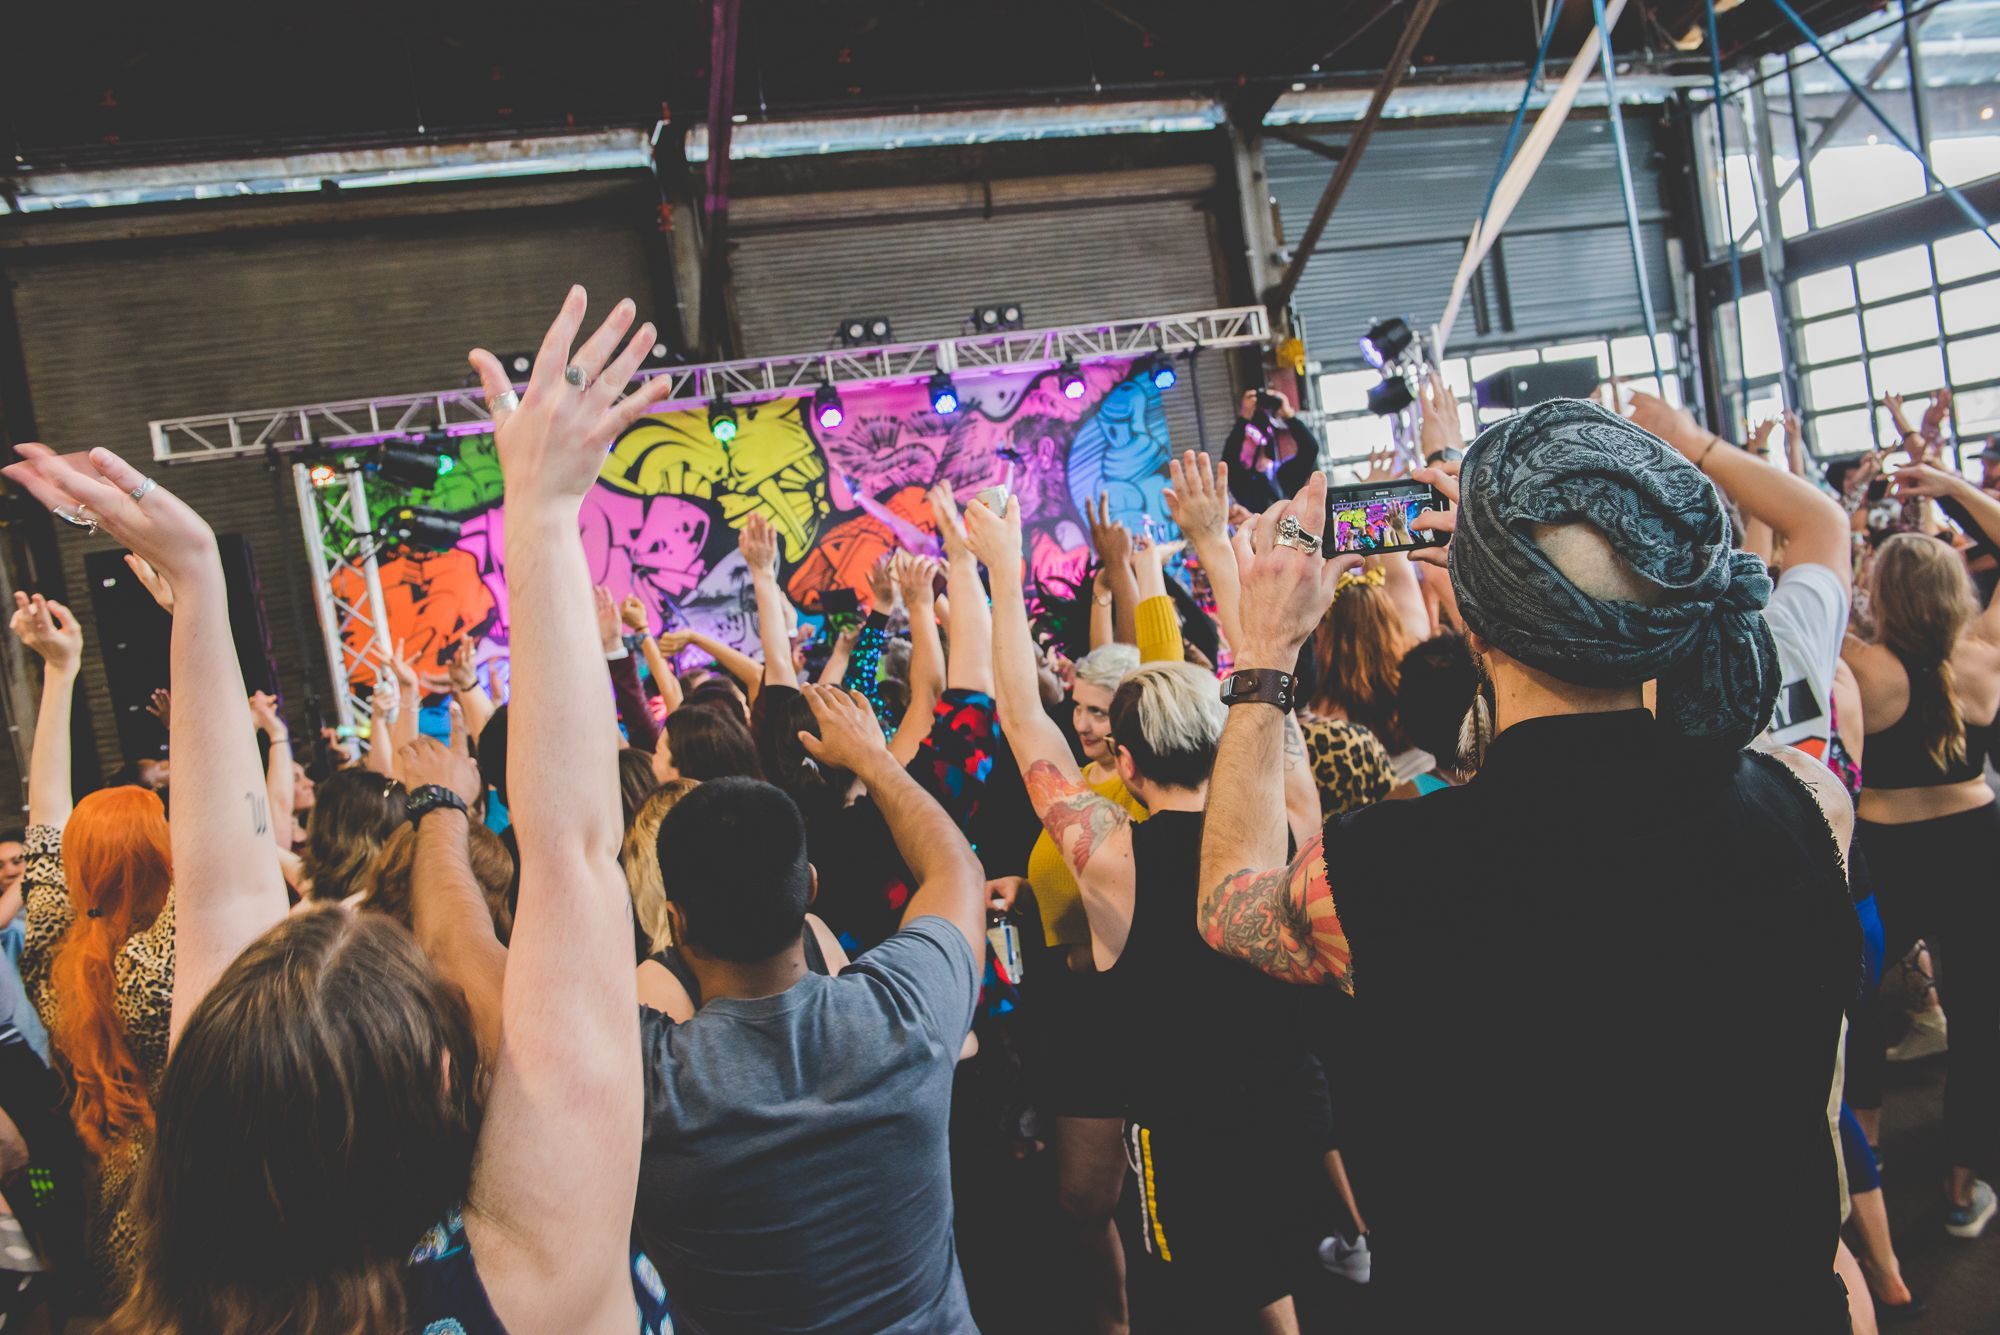 Festival-goers wave their hands in the air in front of a stage.